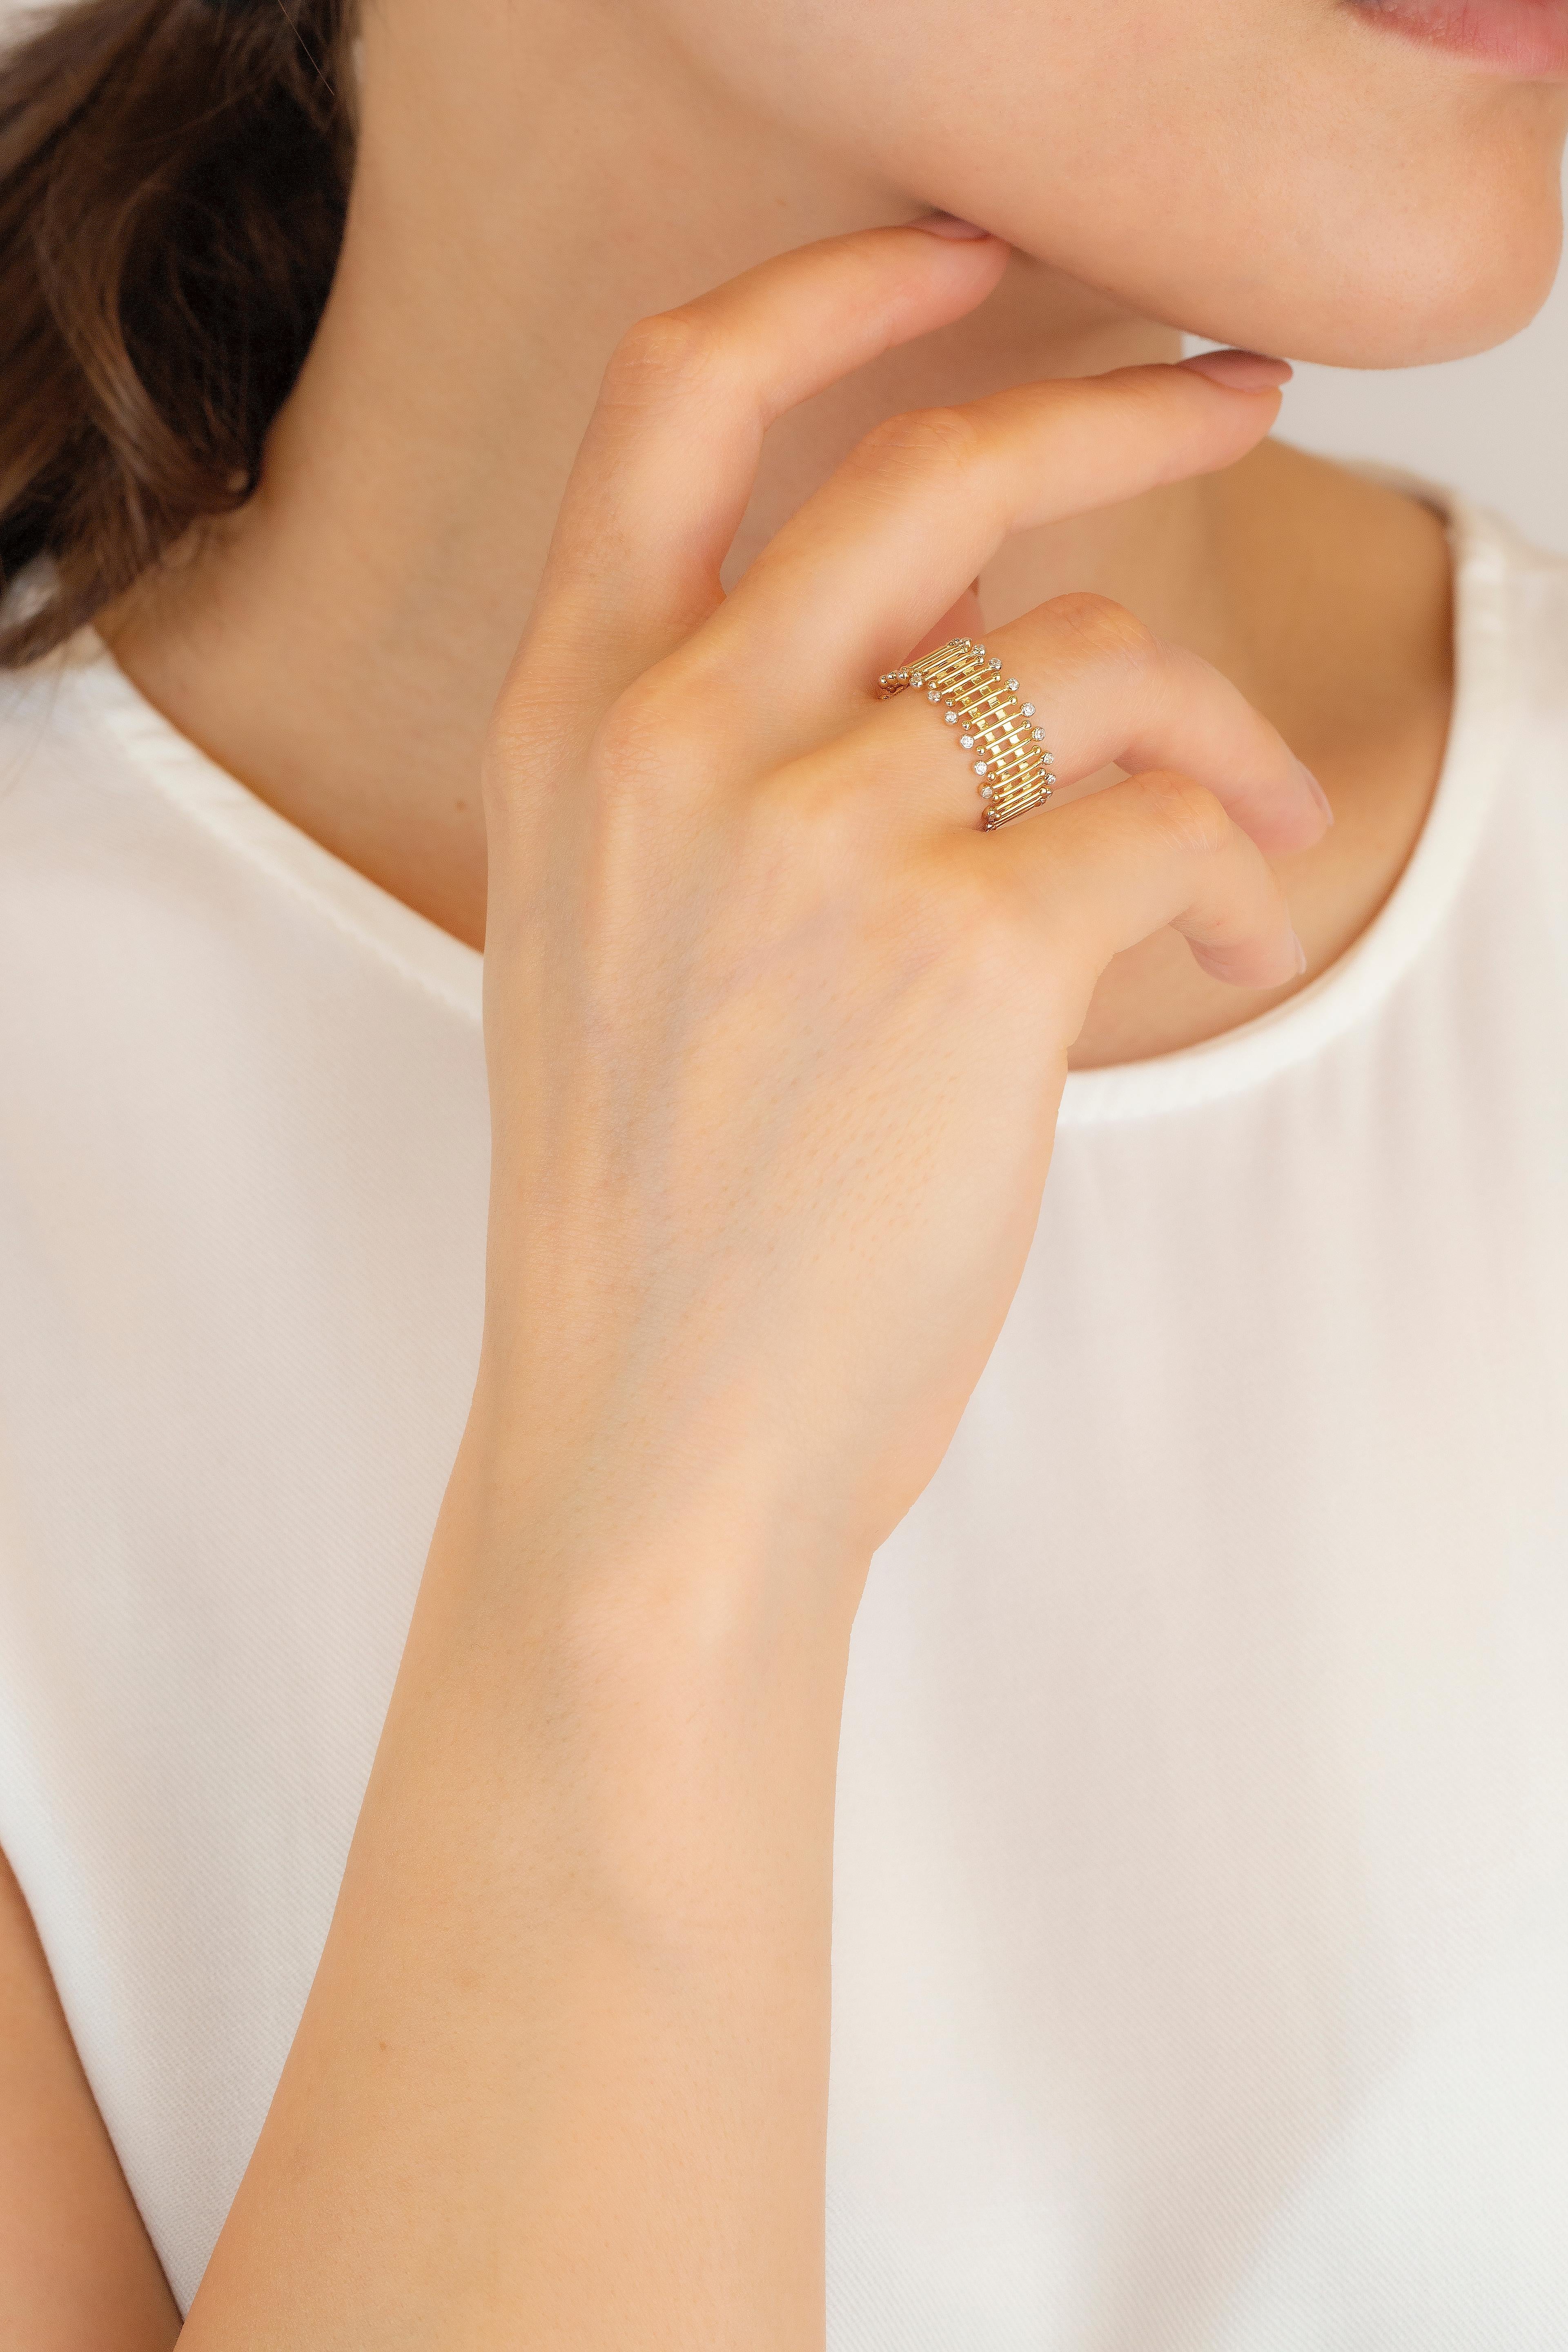 For Sale:  14K Gold Fence Ring, Dainty Fence Ring, 14K Gold Dainty Fence Shaped Ring 2